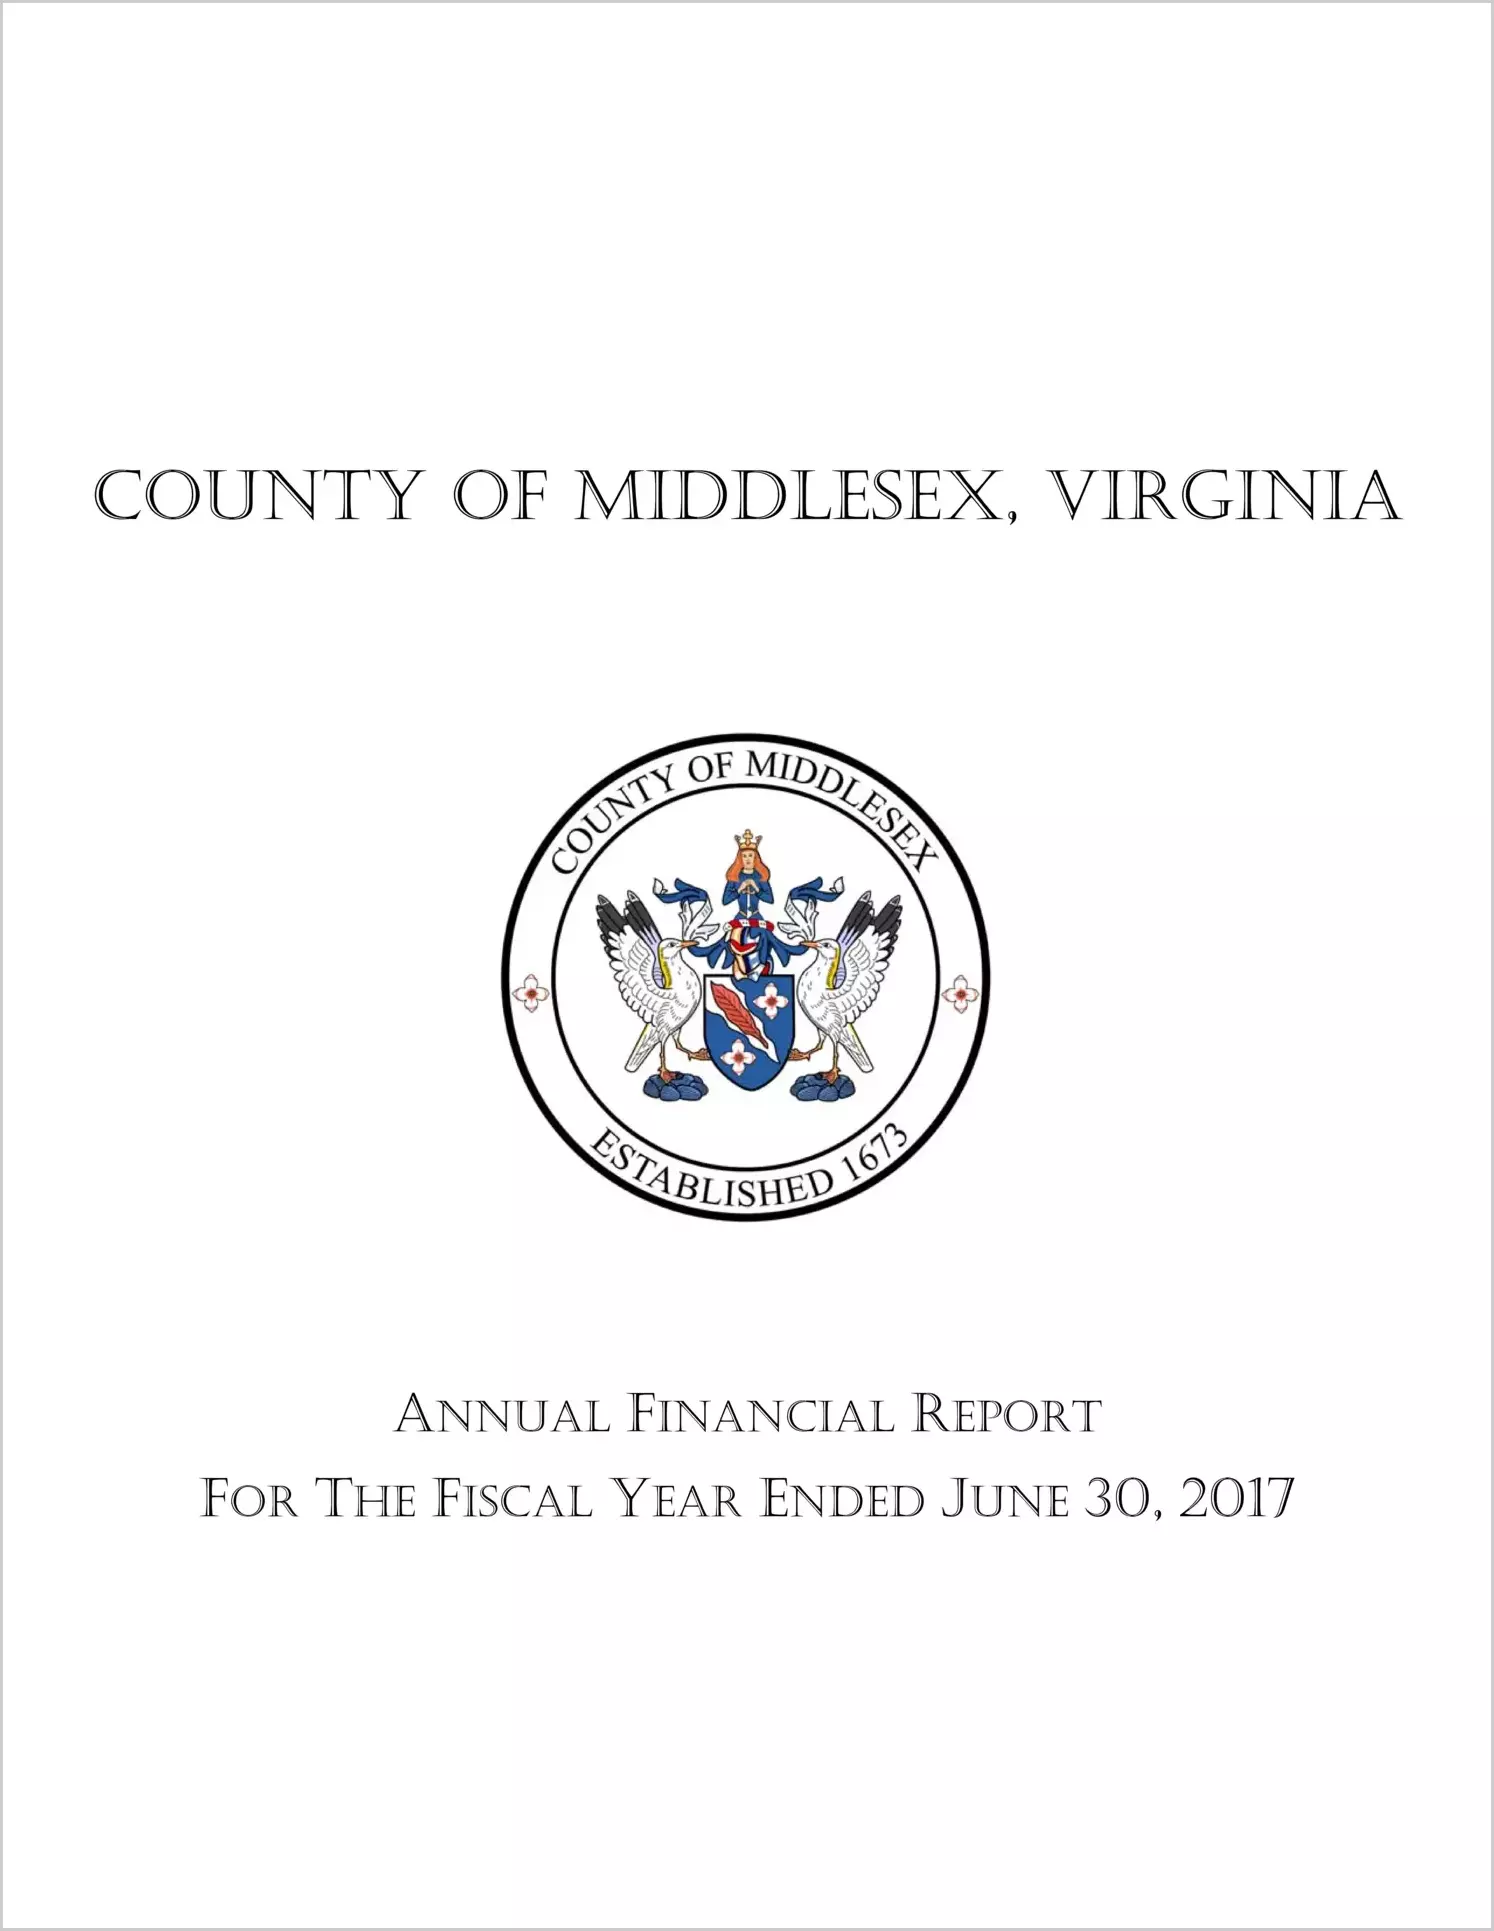 2017 Annual Financial Report for County of Middlesex